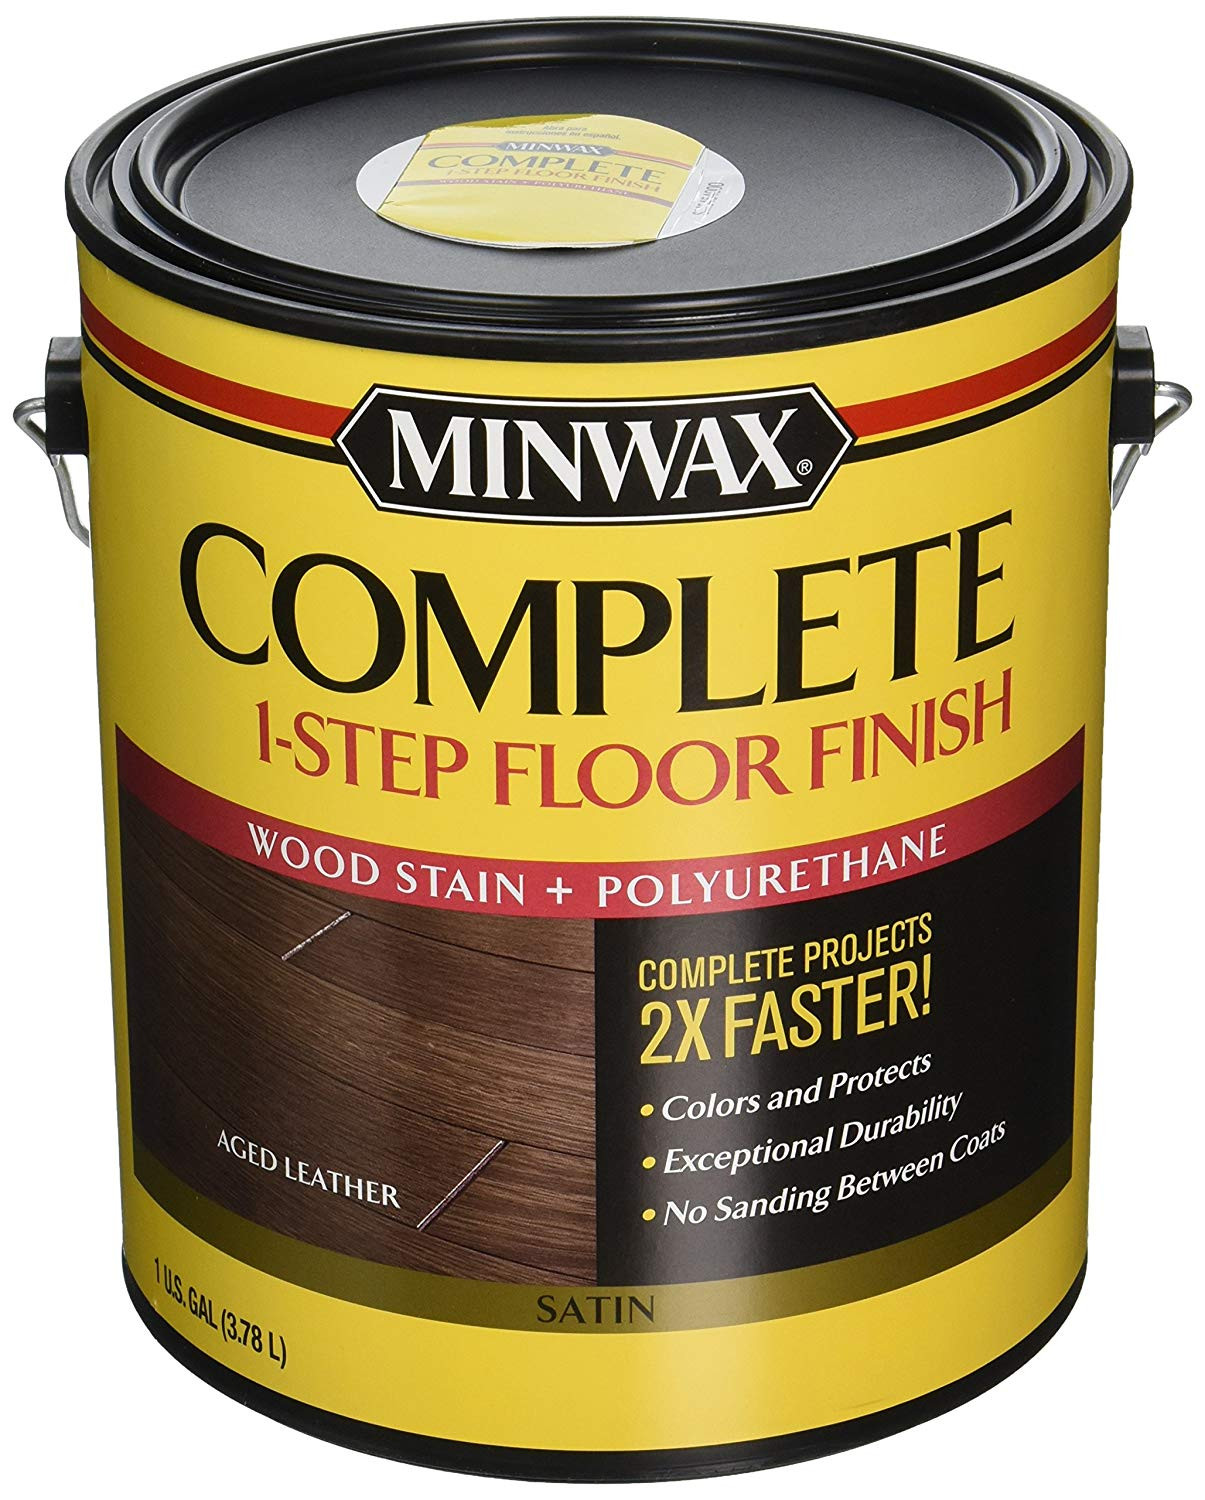 10 Awesome Hardwood Floor Lacquer Finish 2024 free download hardwood floor lacquer finish of minwax 672050000 67205 1g satin aged leather complete 1 step floor intended for minwax 672050000 67205 1g satin aged leather complete 1 step floor finish ama